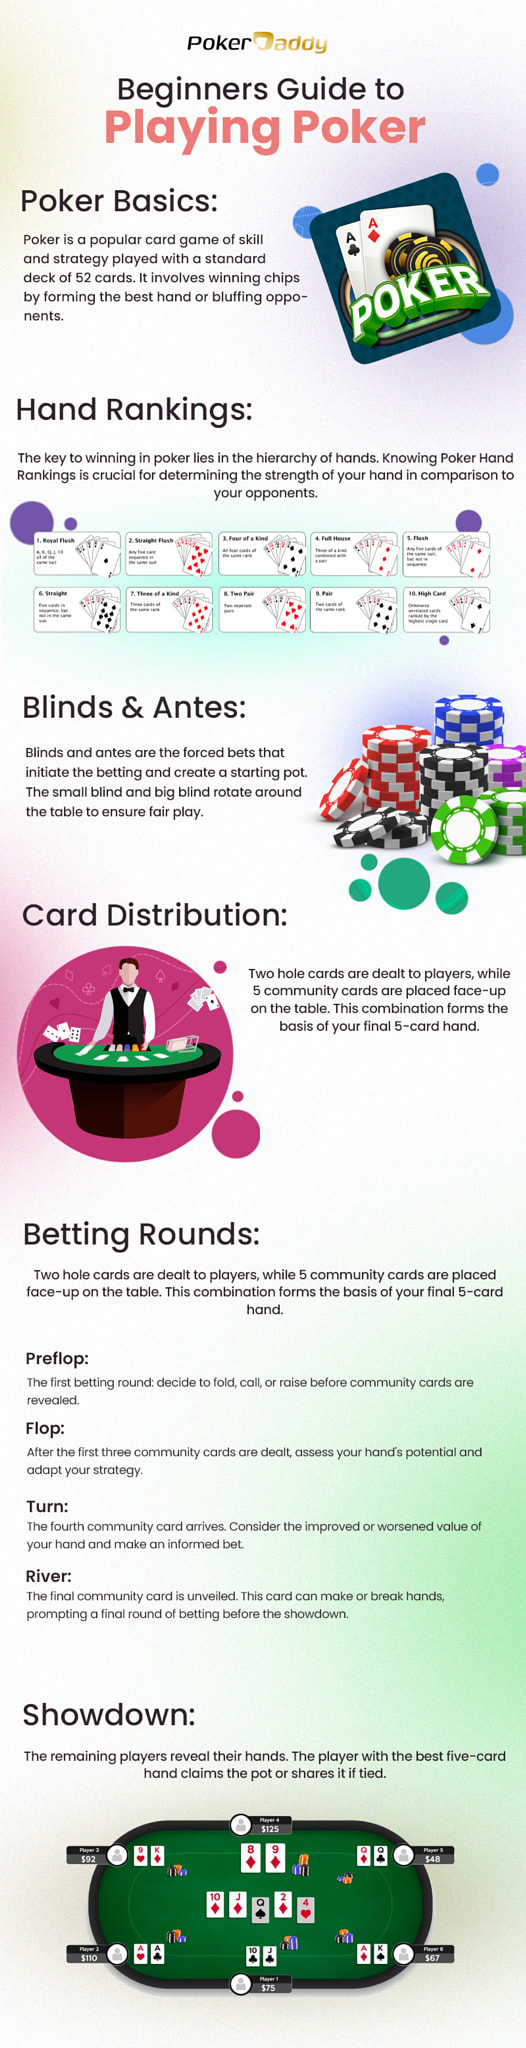 How to play Poker | Beginners Guide Infographic |  PokerDaddy